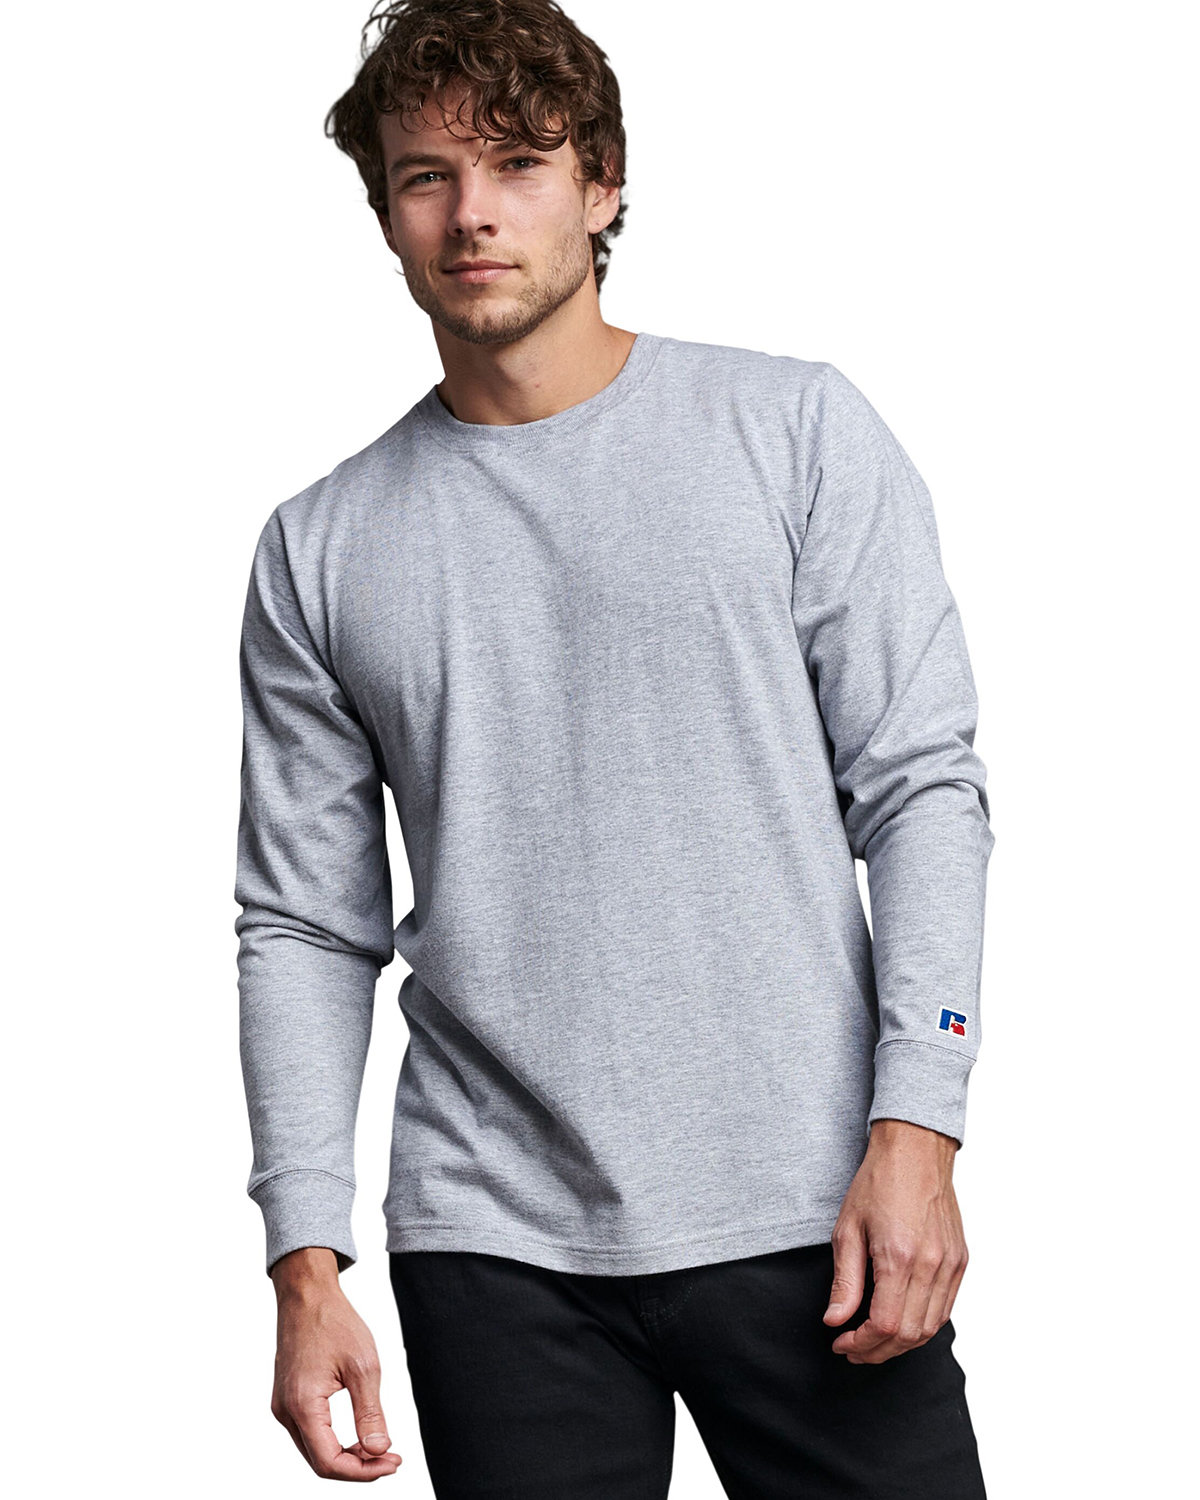 Russell Athletic Unisex Cotton Classic Long-Sleeve T-Shirt ATHLETIC HEATHER 